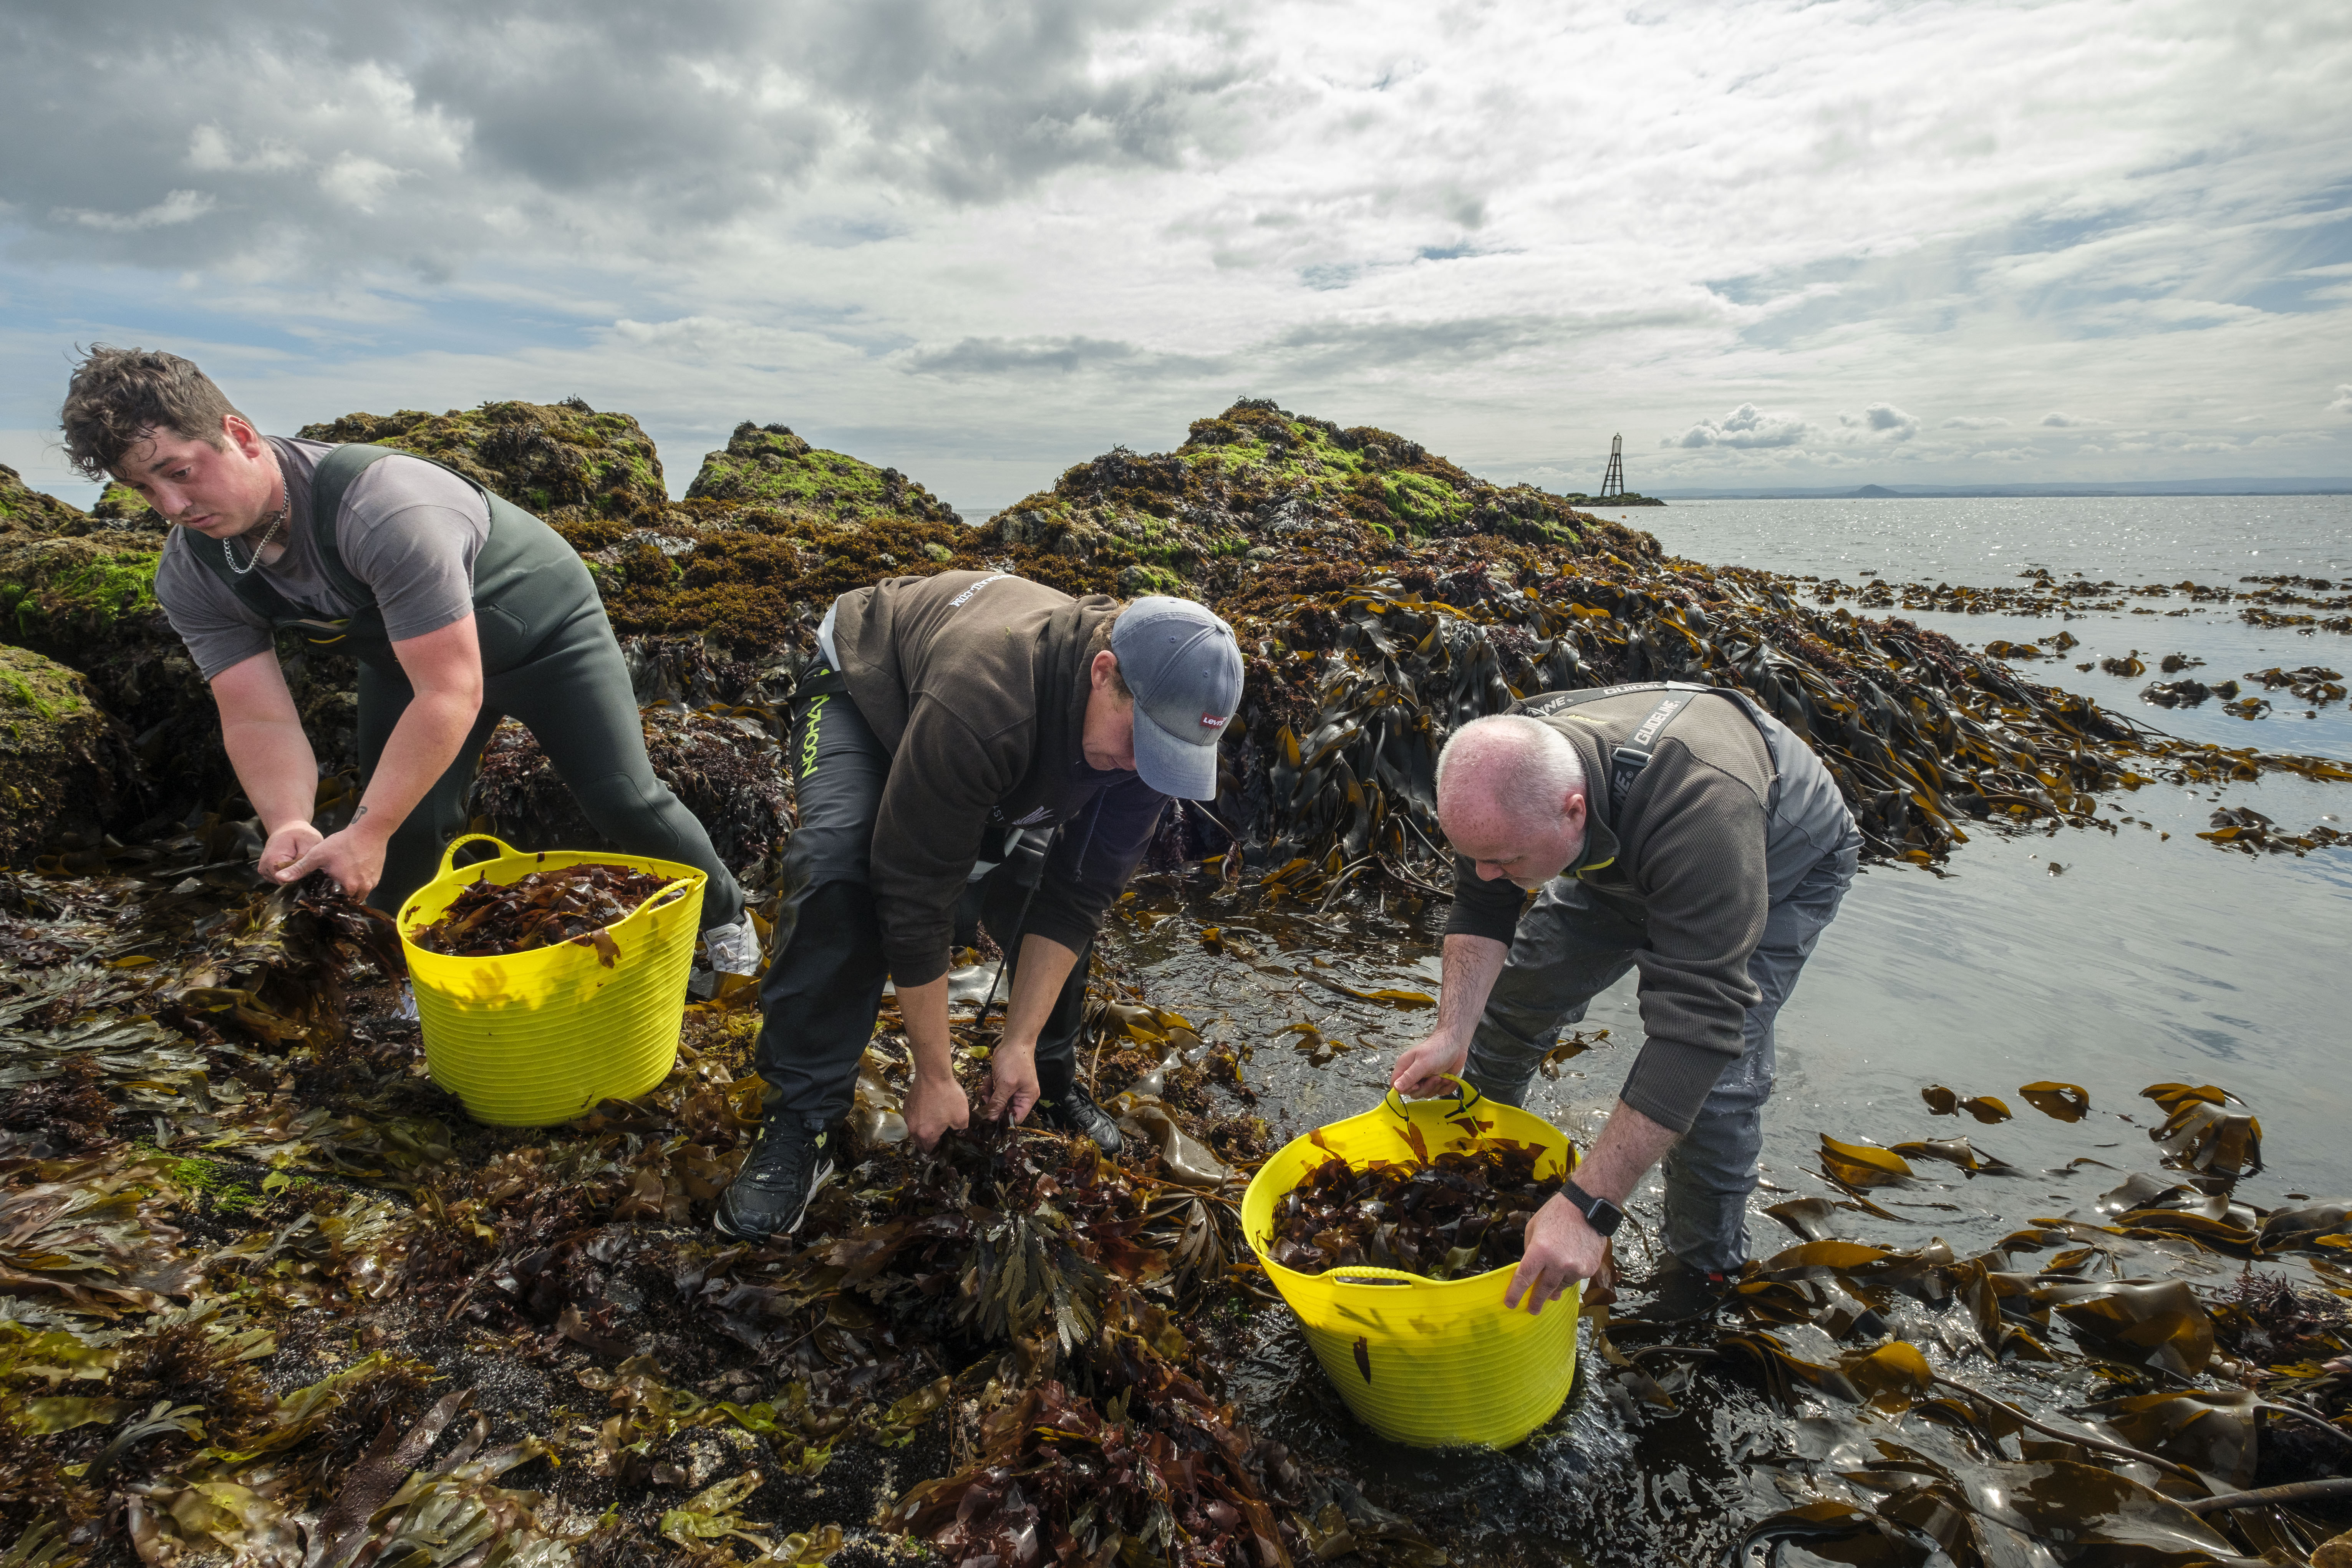 Seaweed Enterprises launches with ambitions to cultivate UK hub for sustainable seaweed